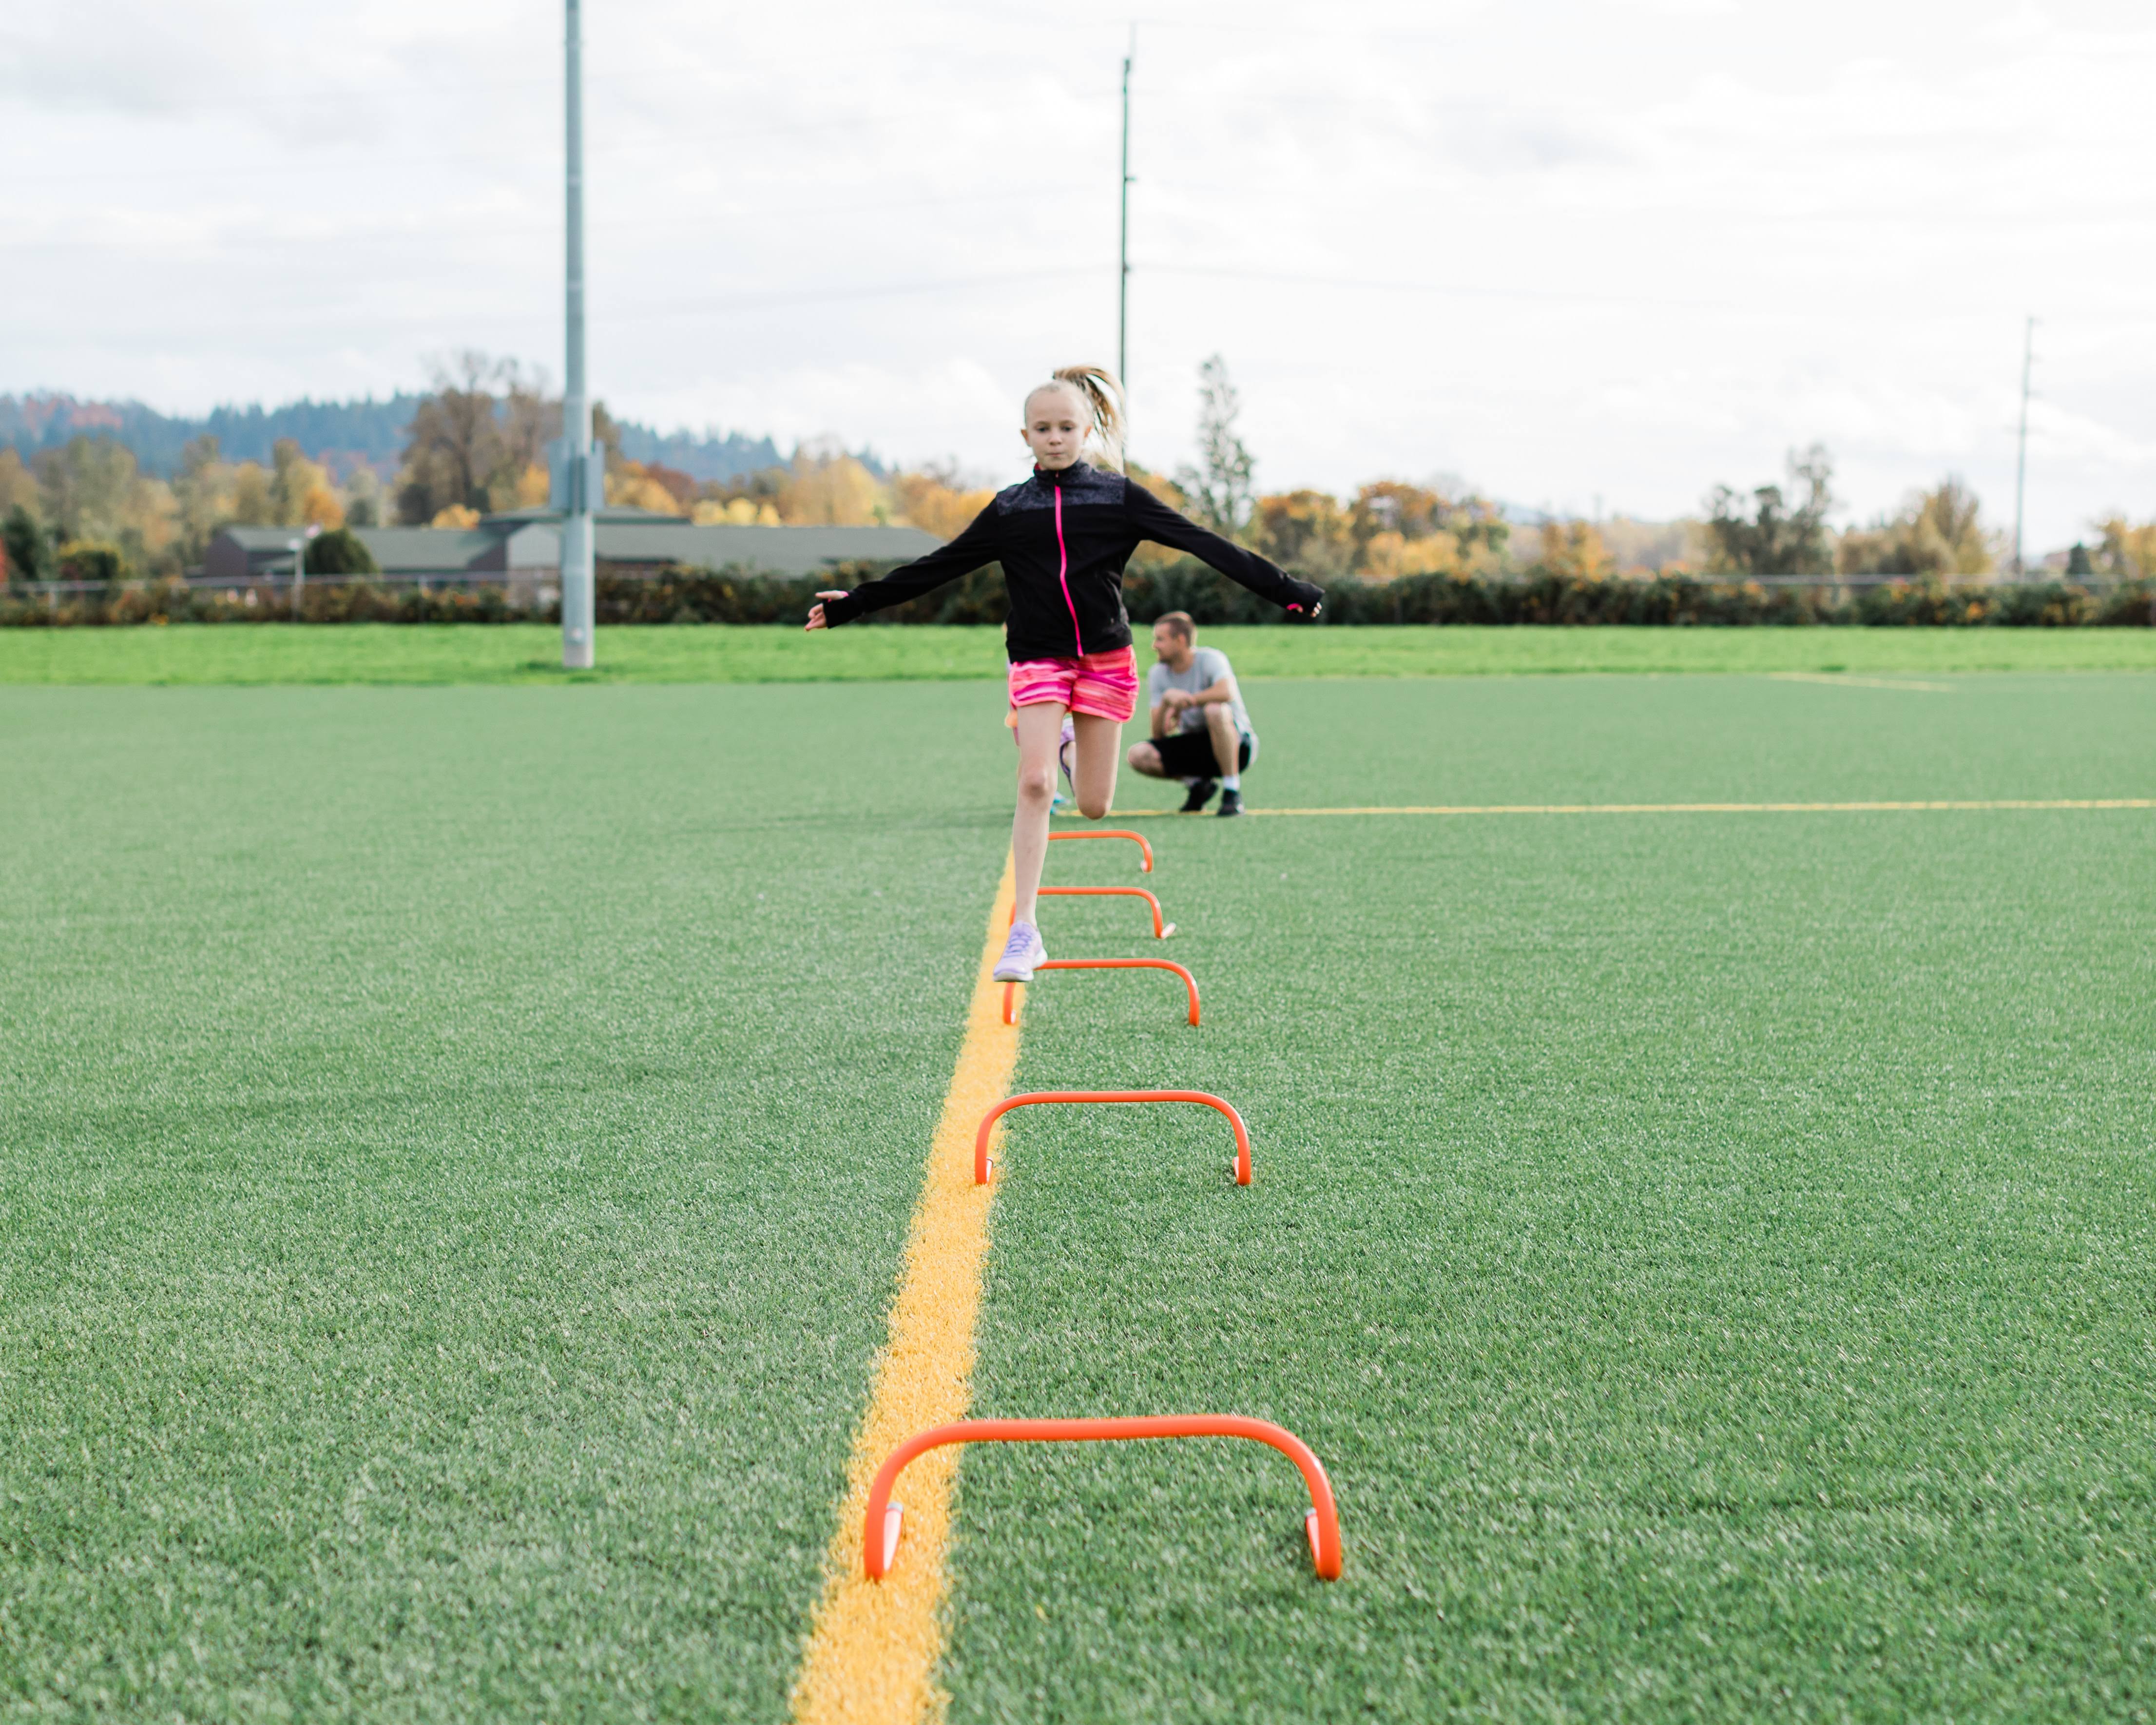 Track and field athlete training on a field and jumping over a small hurdle.